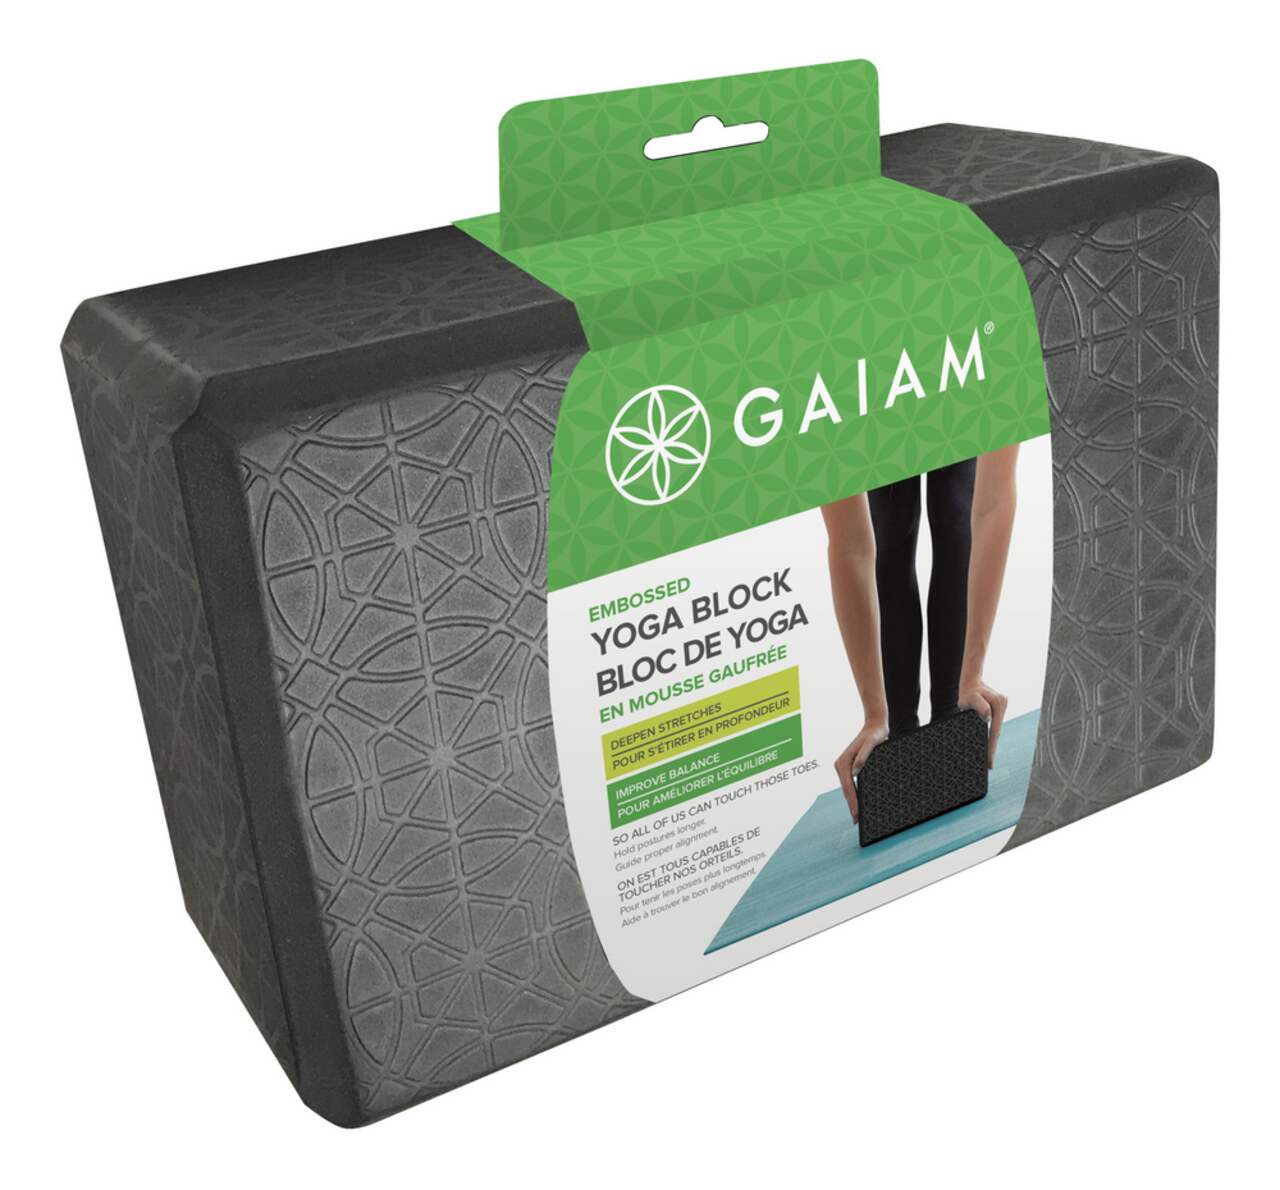 https://media-www.canadiantire.ca/product/playing/exercise/exercise-accessories/1840608/gaiam-yoga-embossed-block-black-d82ae1c1-1db5-4aa5-a5b0-a961a8c8c558.png?imdensity=1&imwidth=1244&impolicy=mZoom